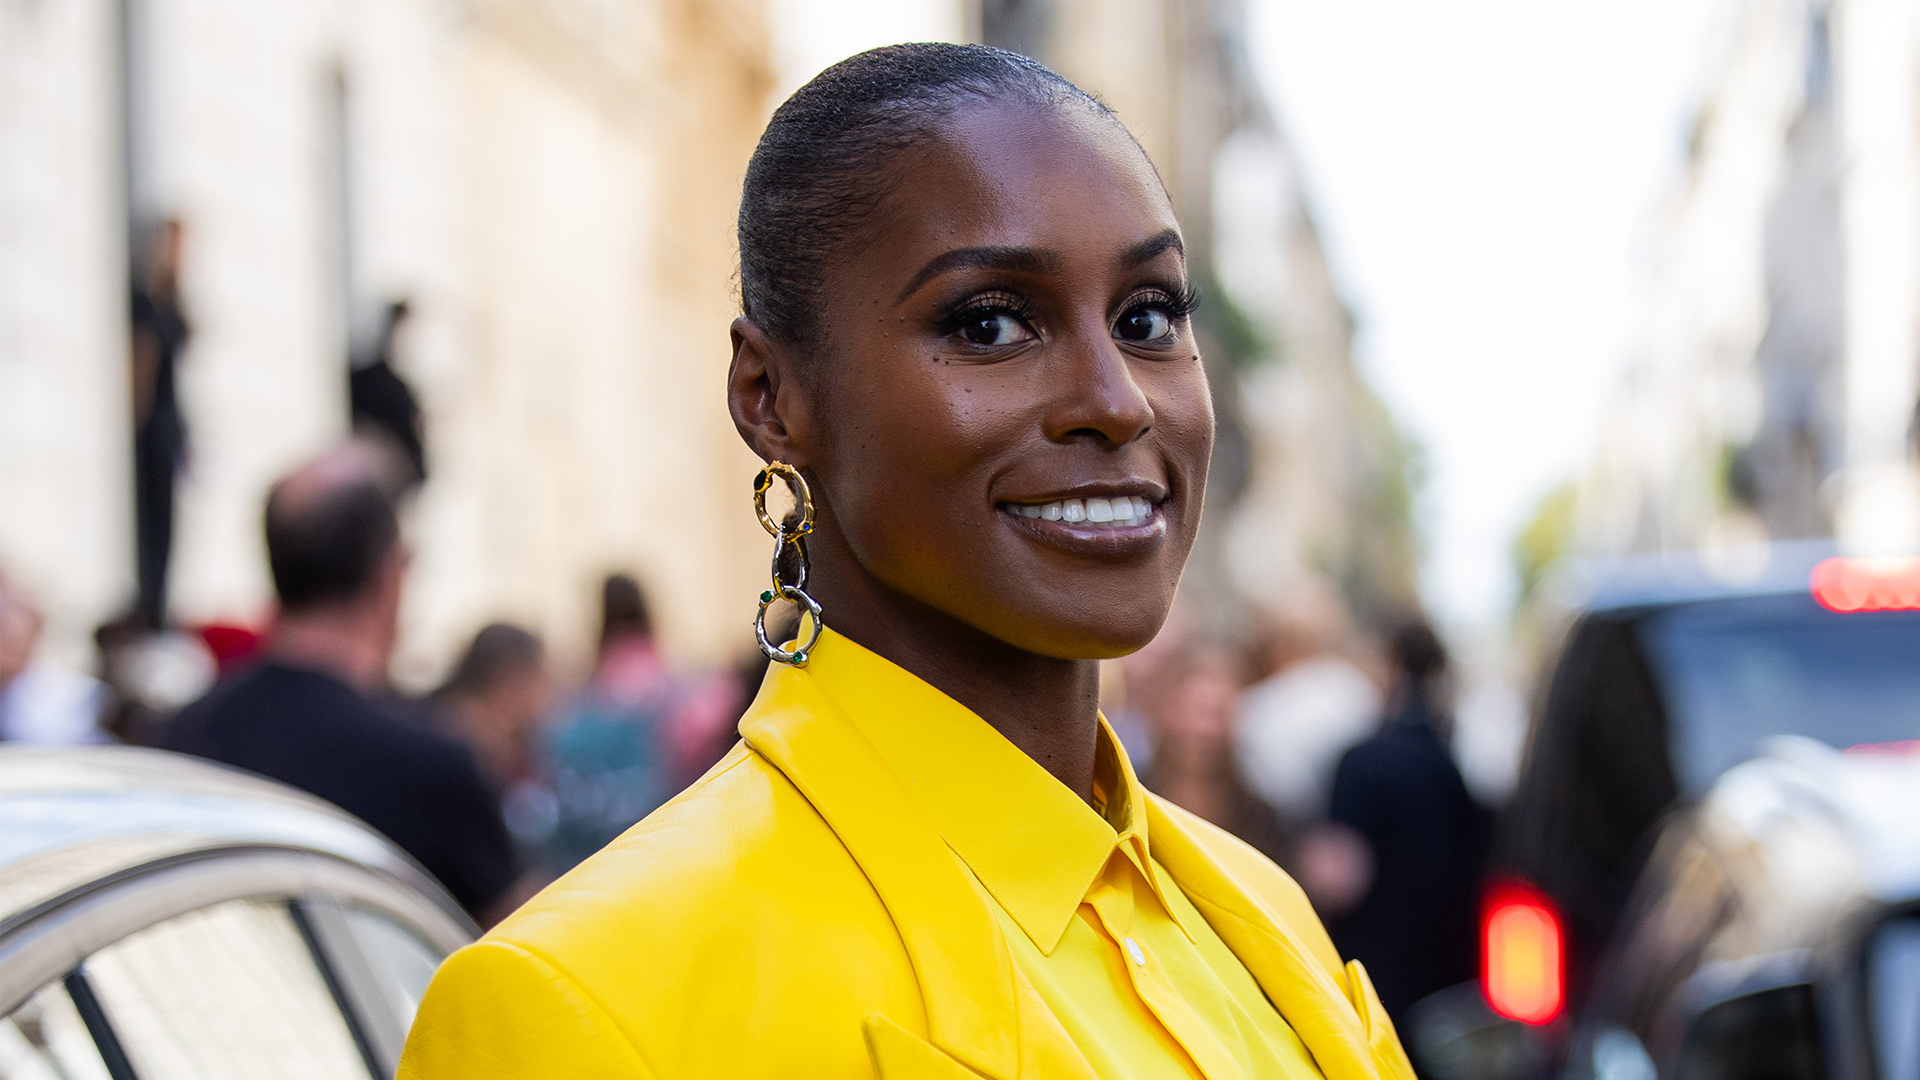 Issa Rae Turns Her Love For Prosecco Into Launching Her Wine Brand Viarae Prosecco